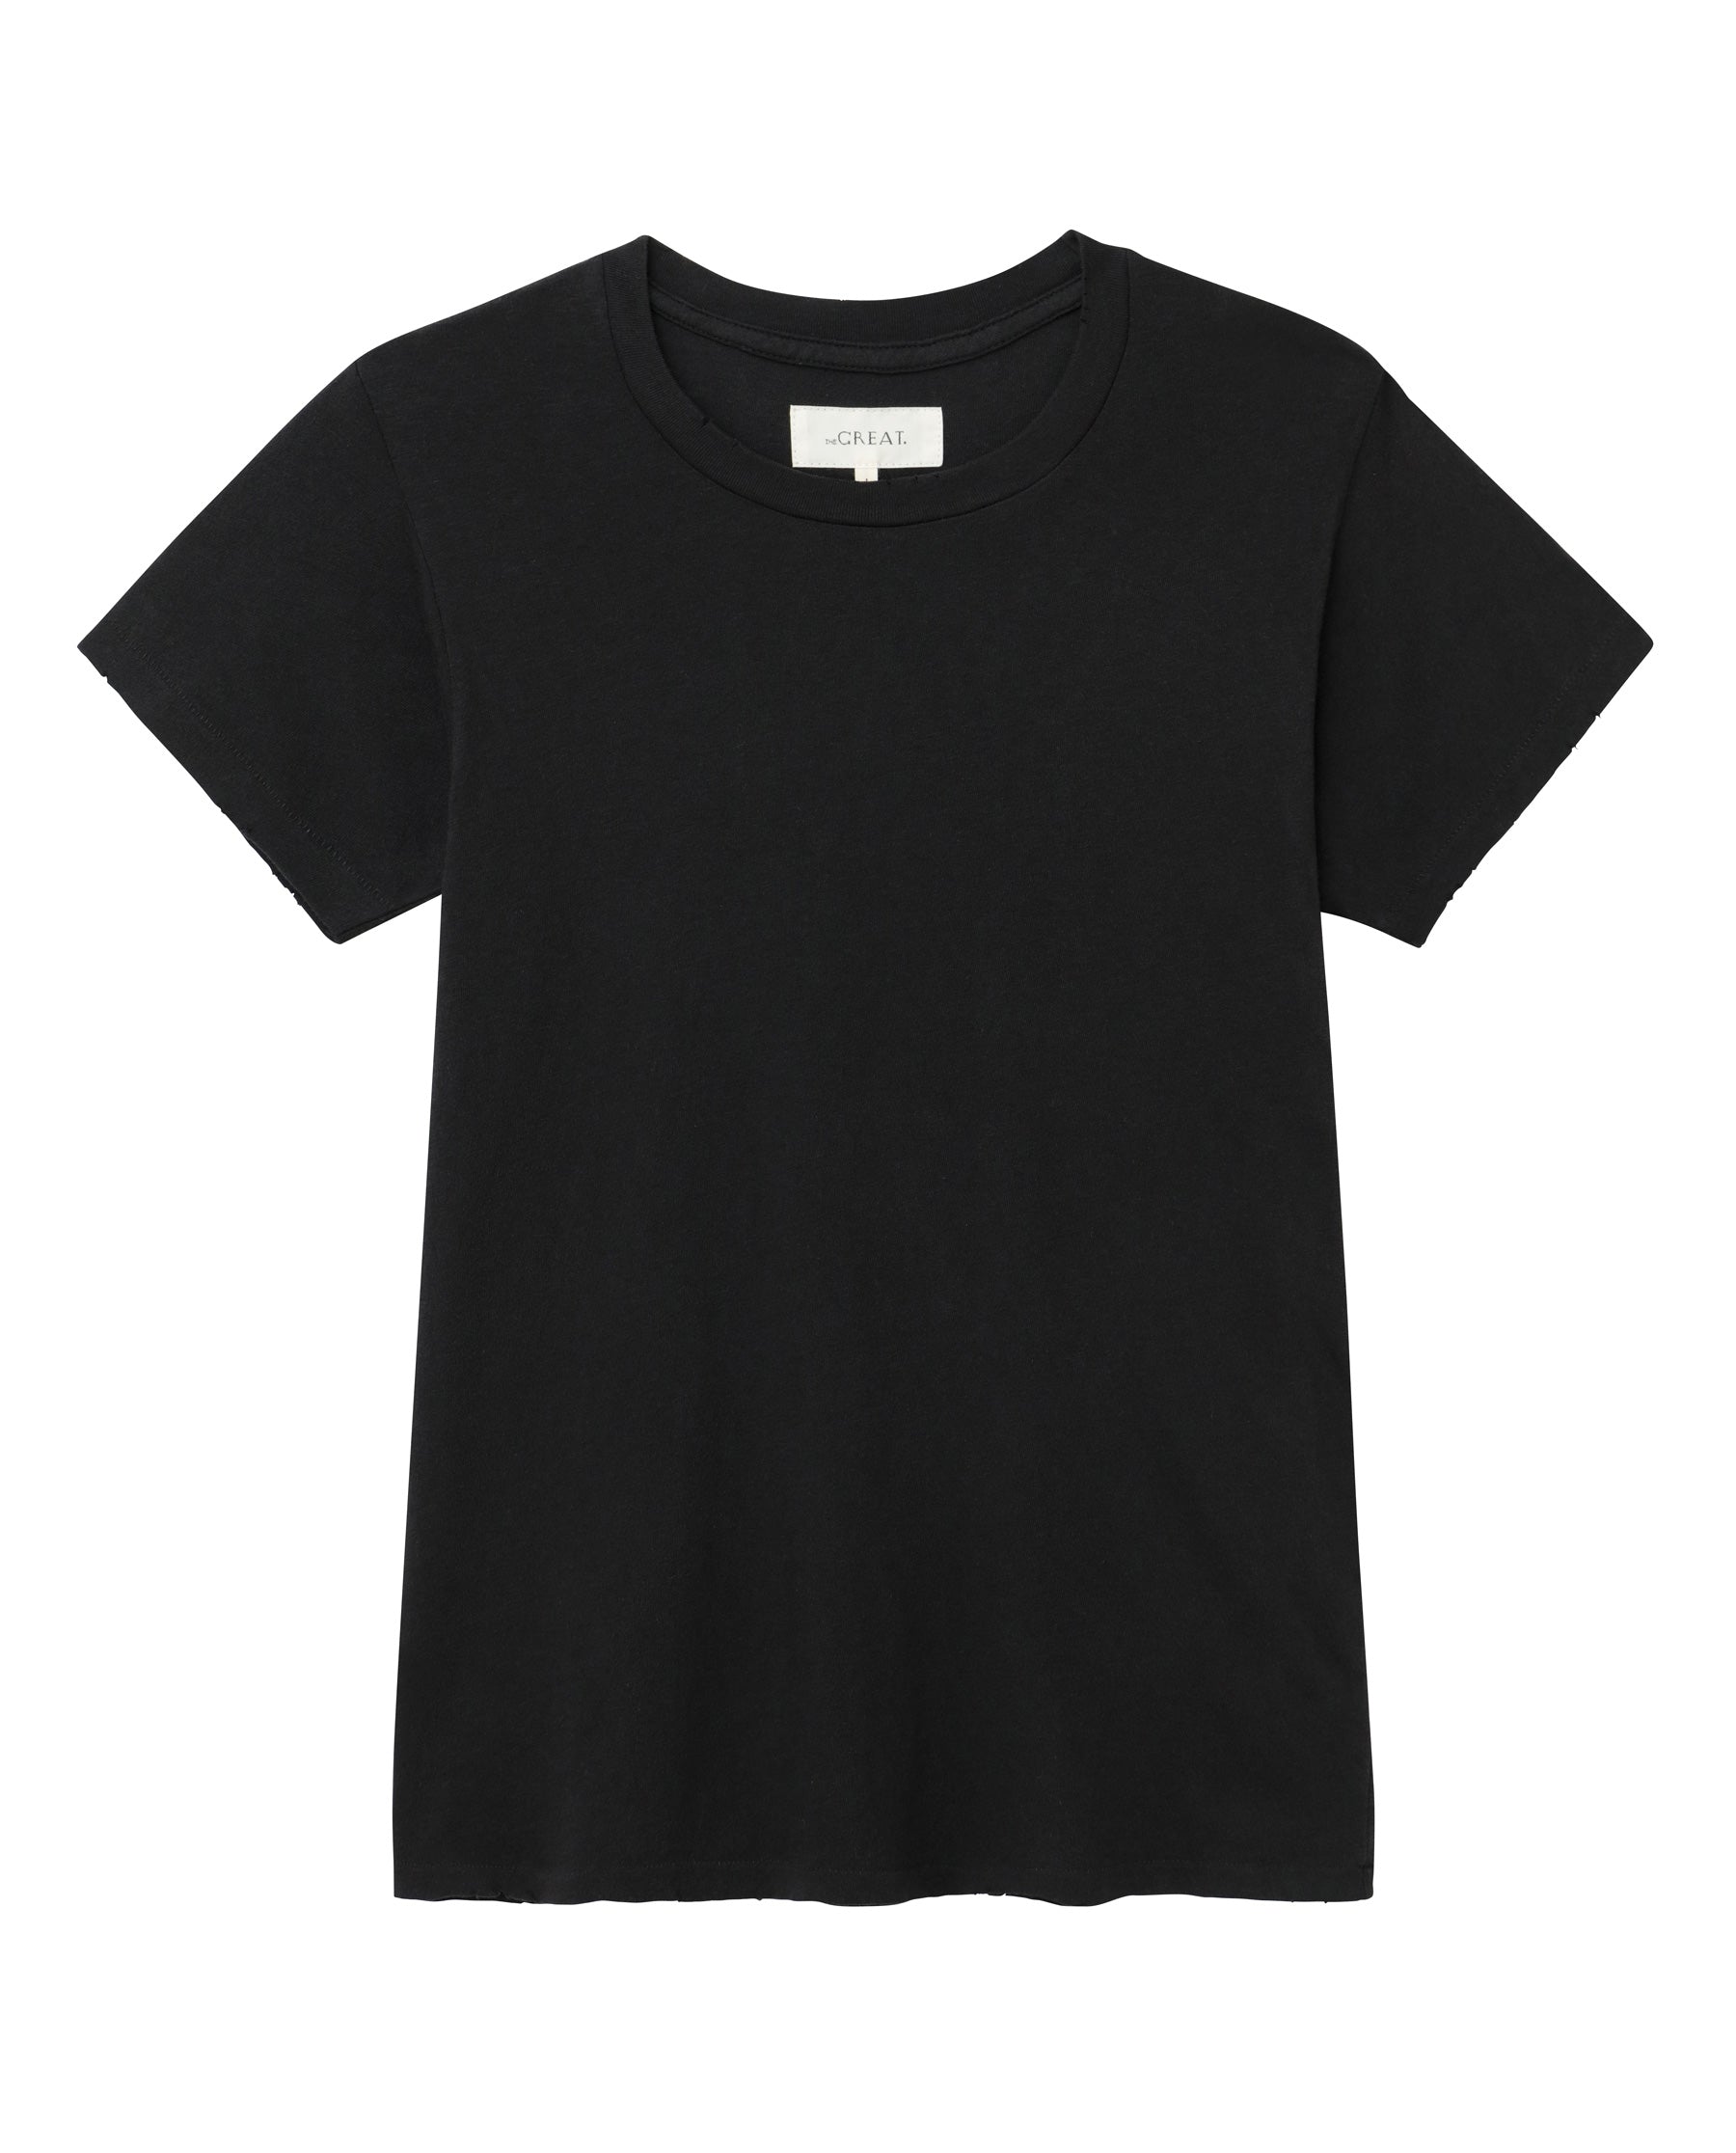 The Slim Tee. Solid -- Almost Black TEES THE GREAT. CORE KNITS